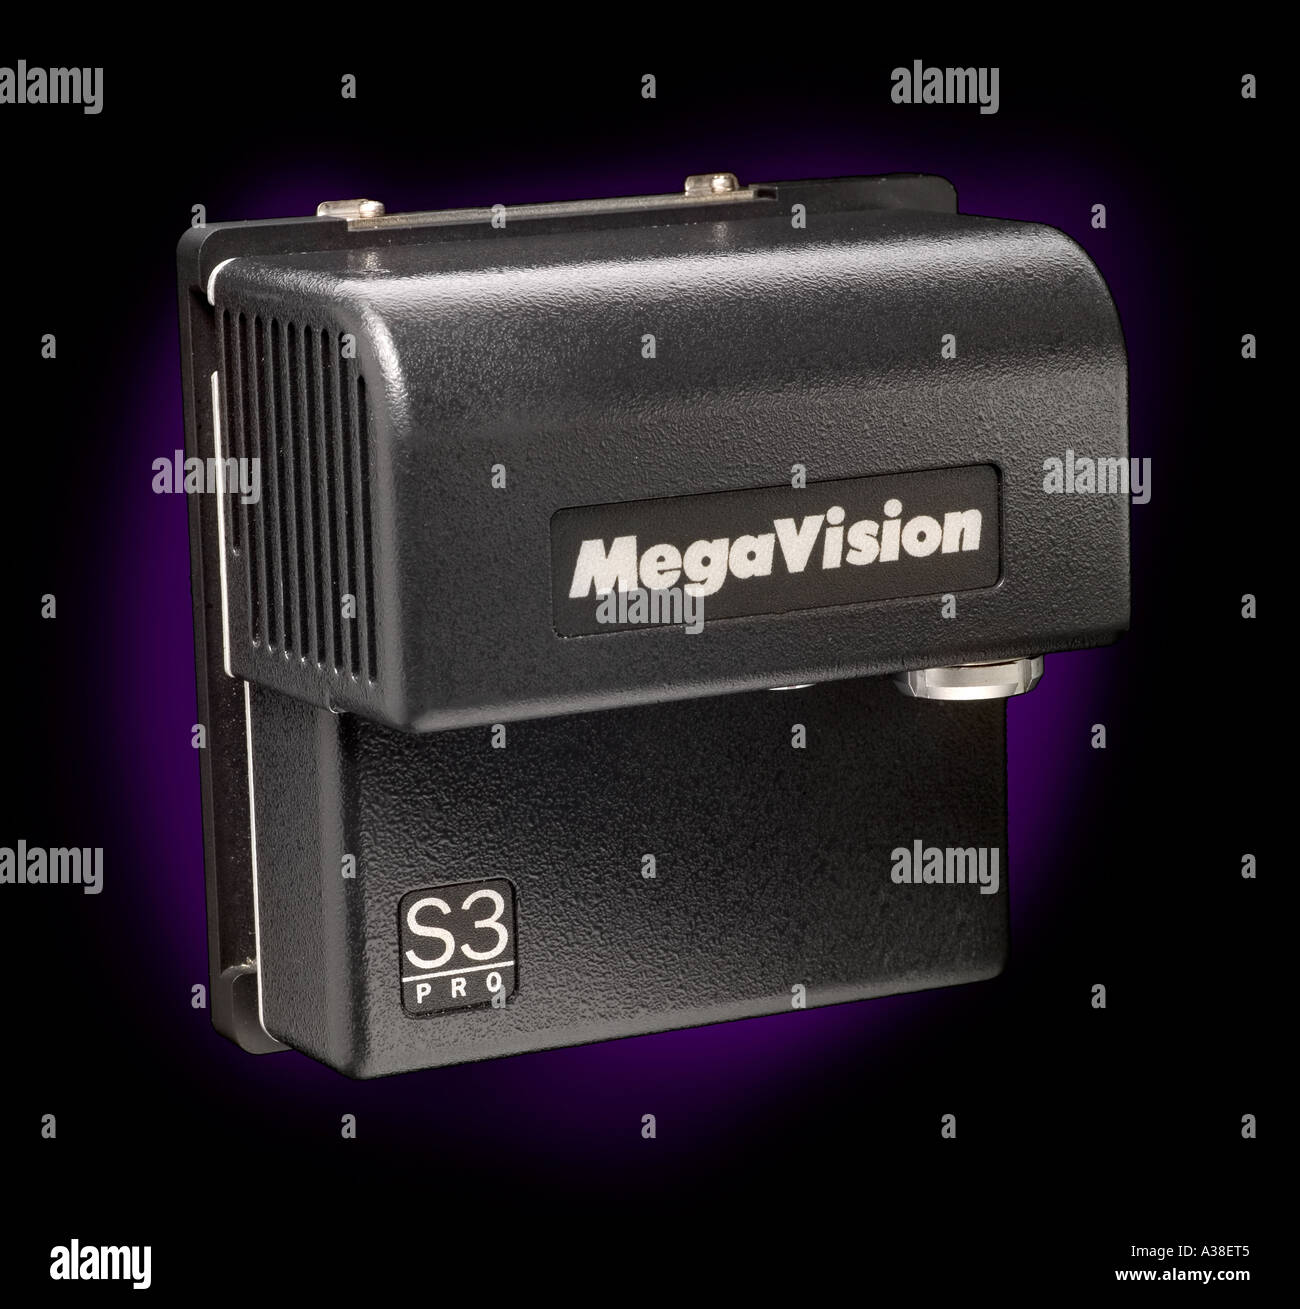 MegaVision S3 pro CCD Philips chip six stiched chips Stock Photo